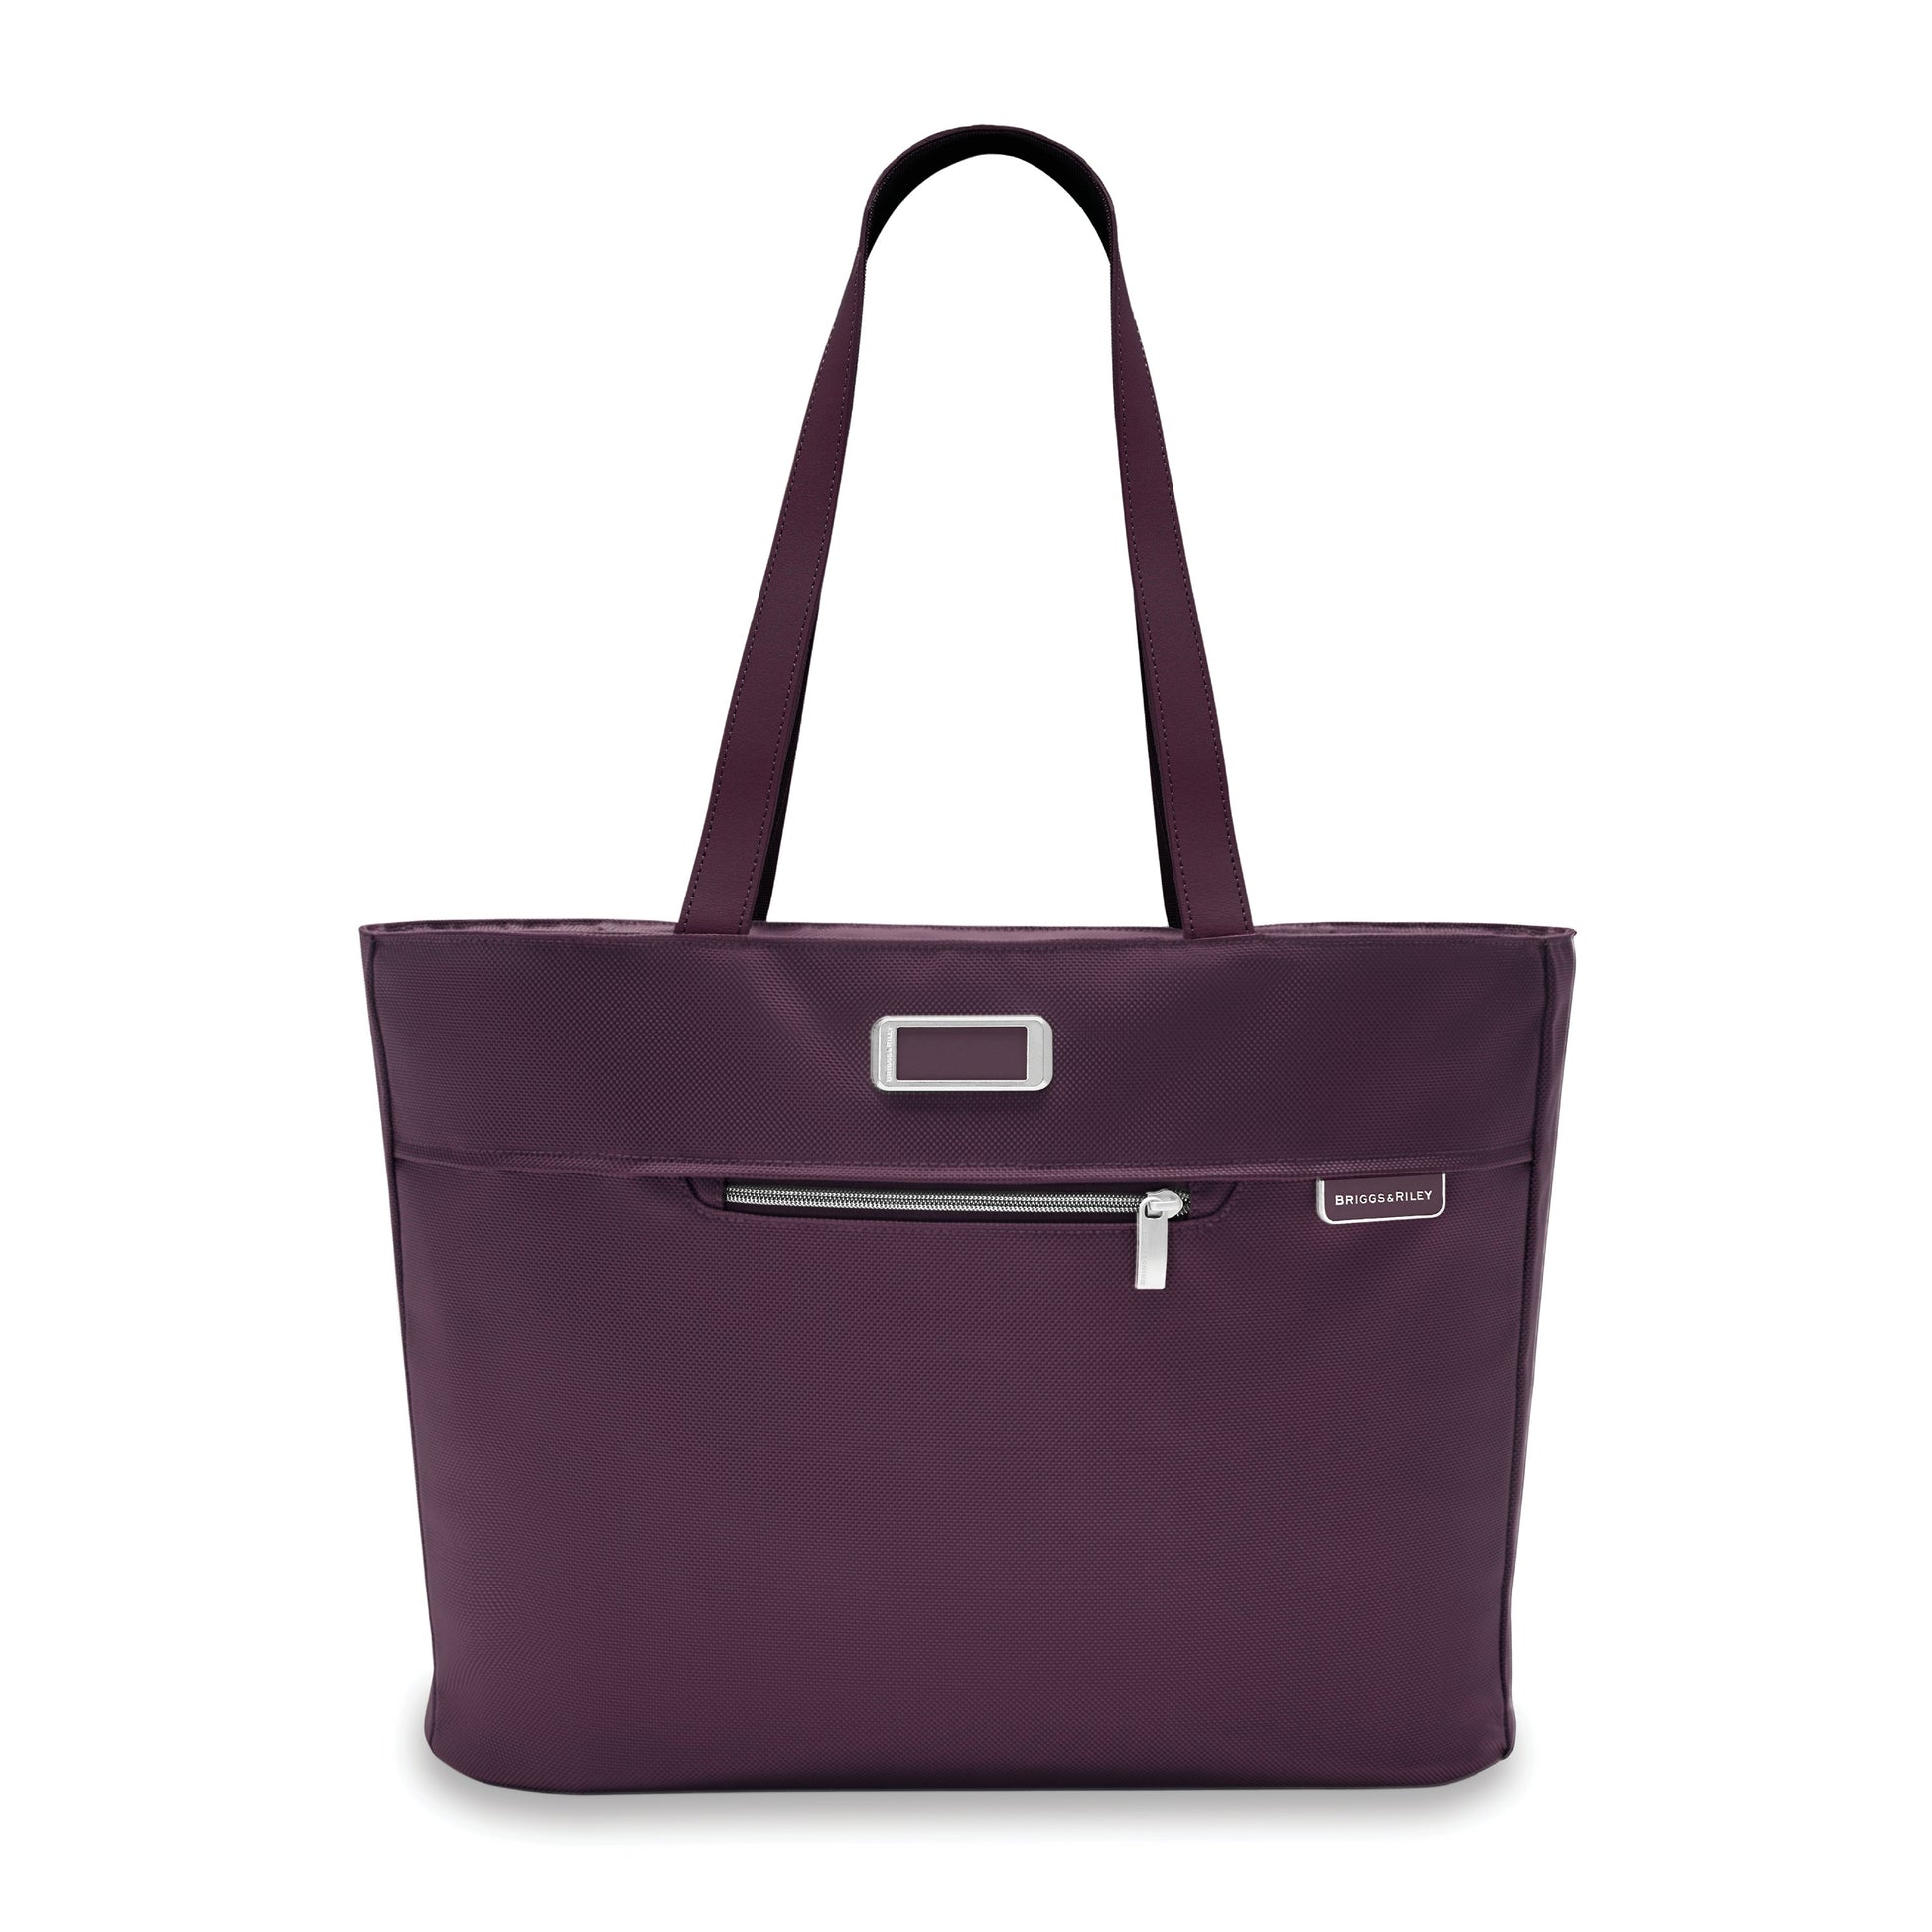 Briggs & Riley NEW Baseline Traveler Tote Bag - Limited Edition: Plum